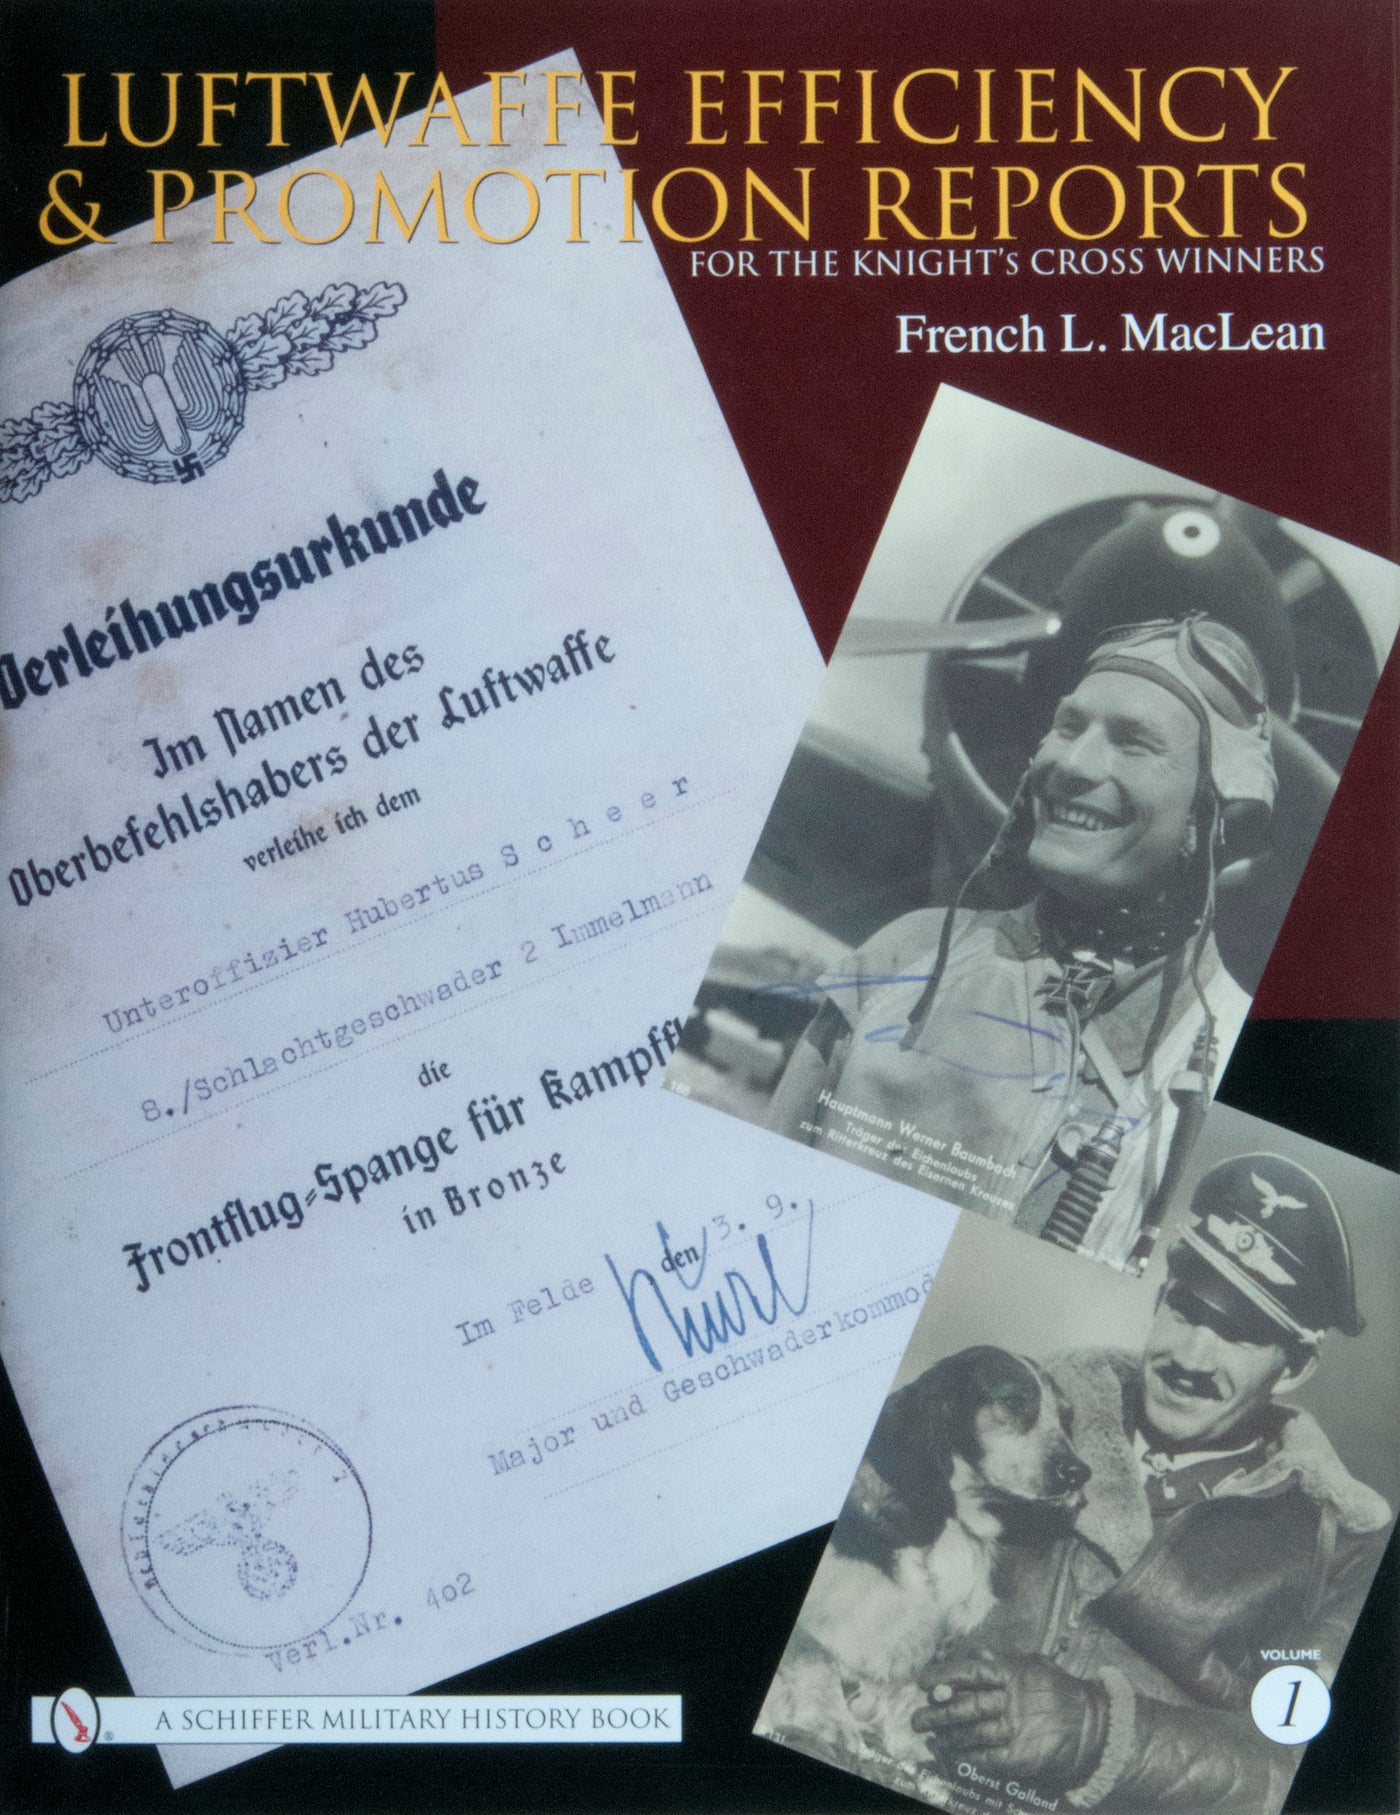 Luftwaffe Efficiency and Promotion Reports for the Knight's Cross Winners